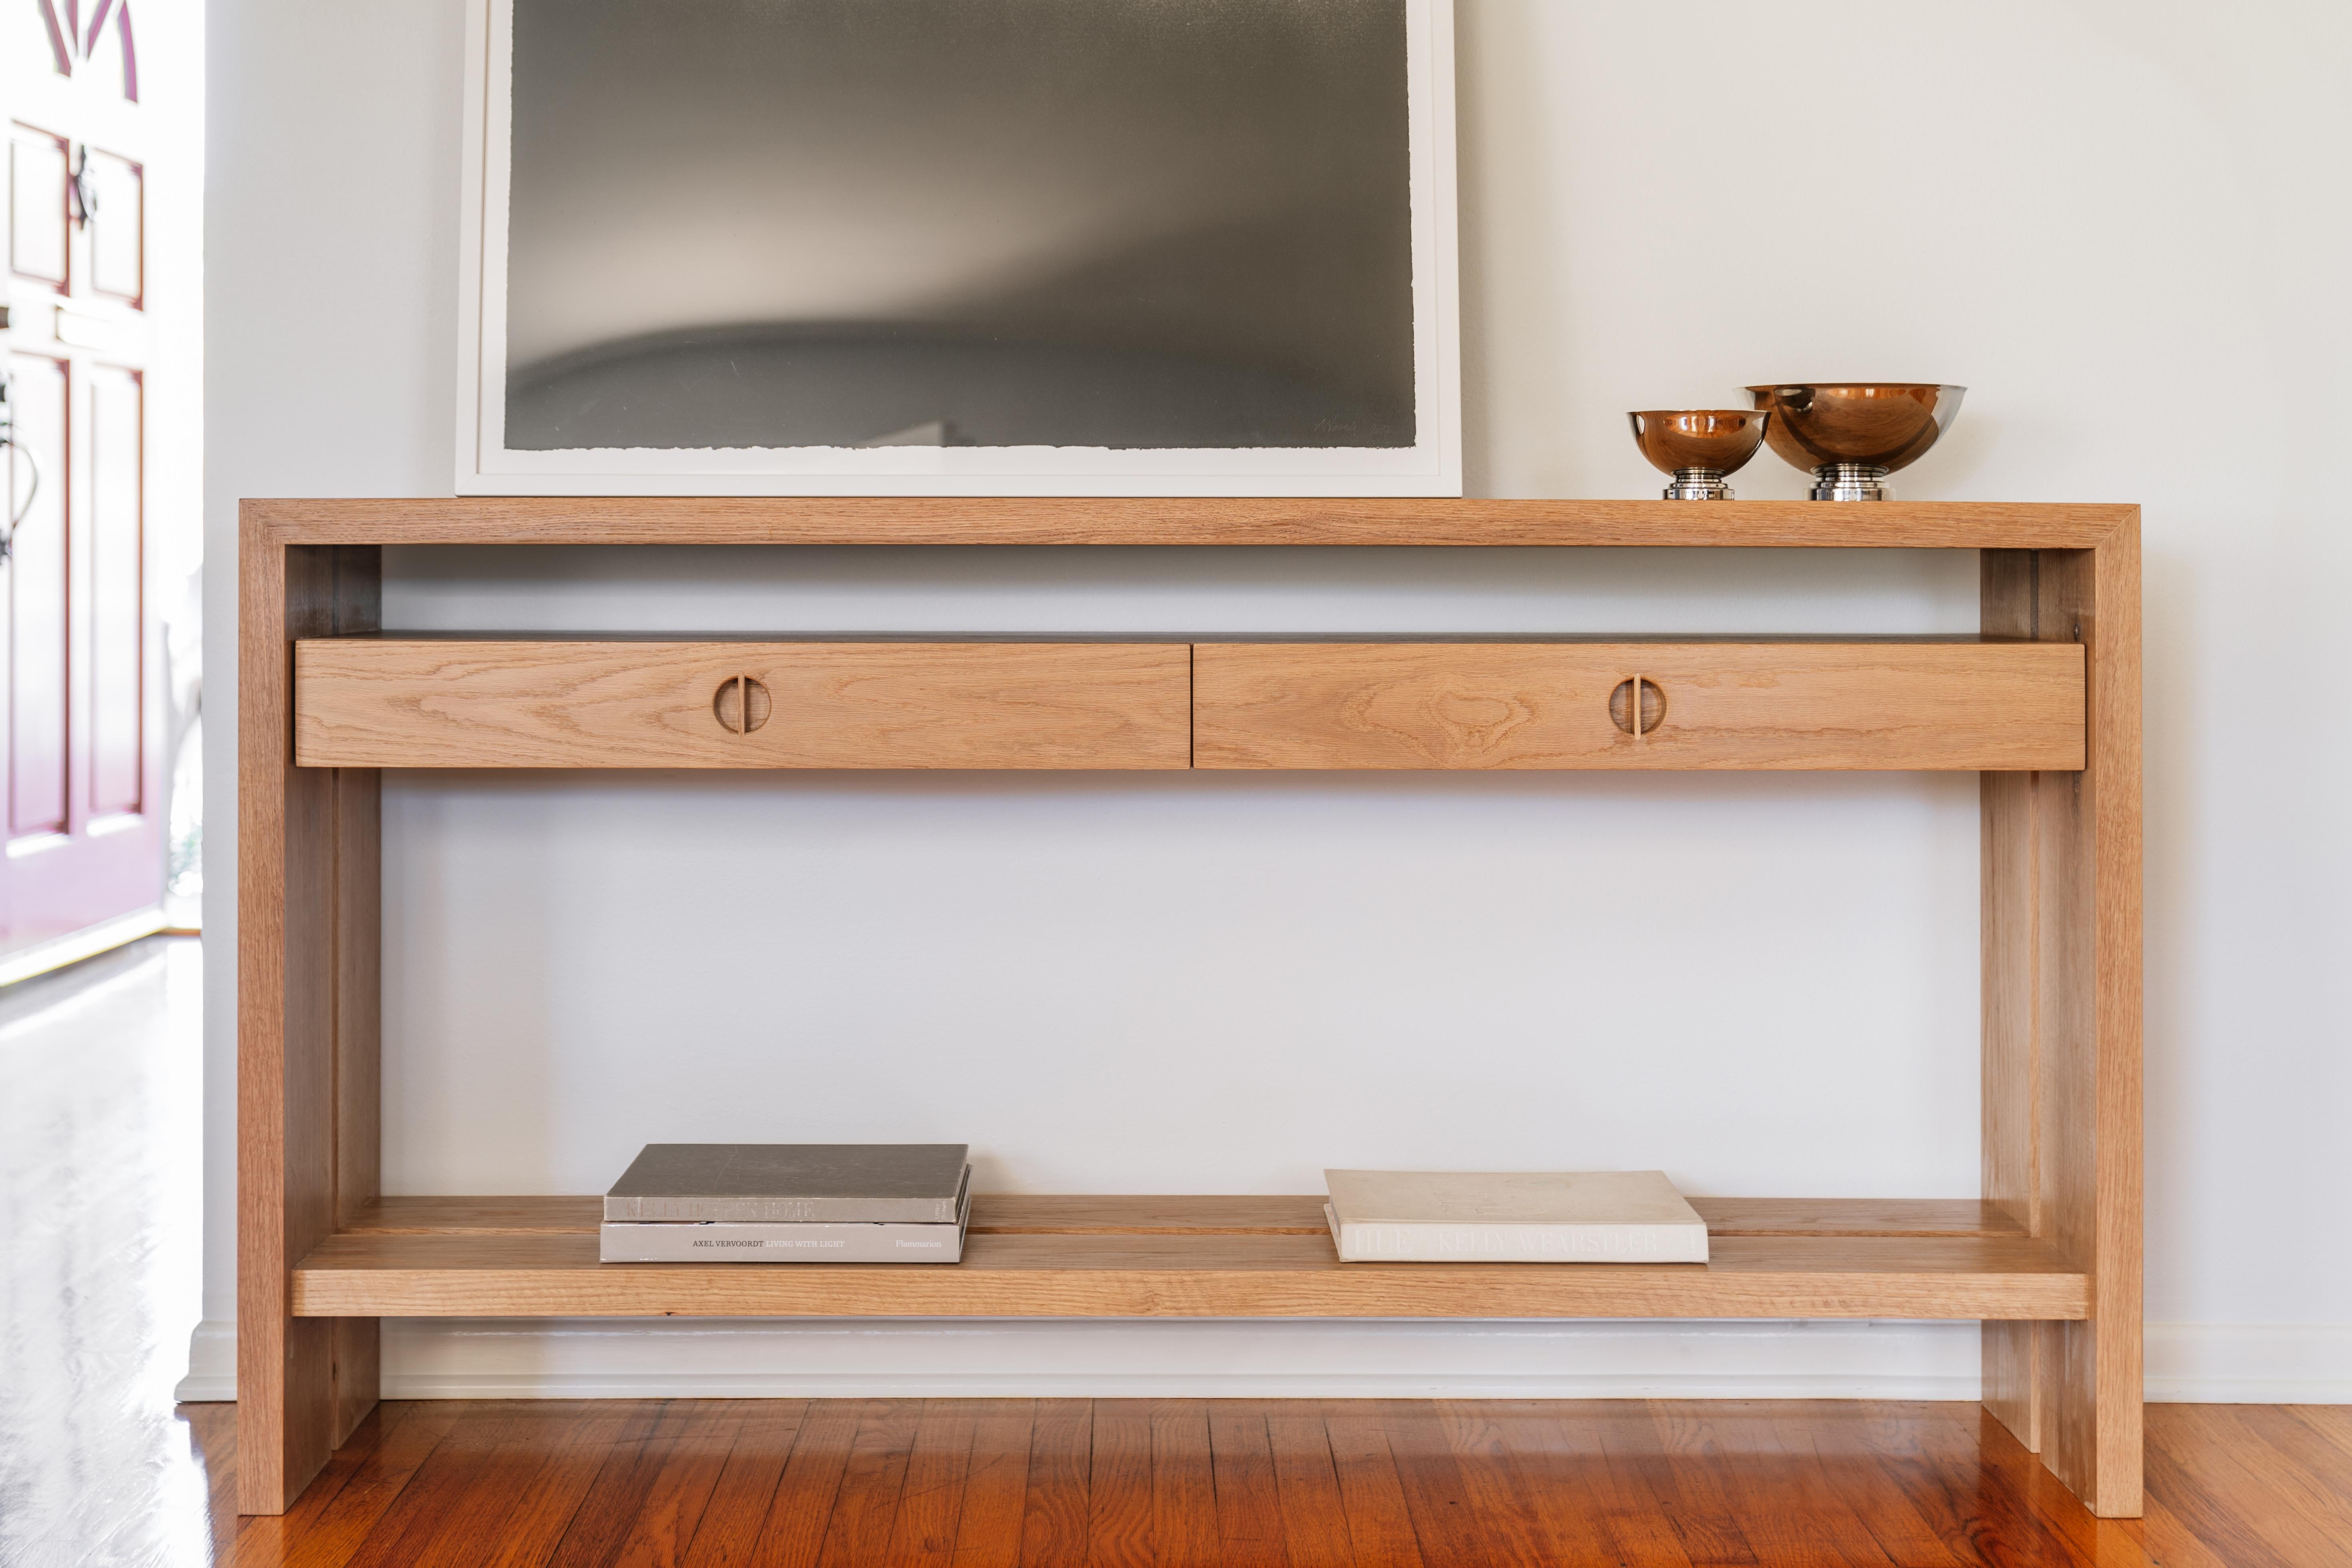 This custom wood console table is hand-made in the United States with all hardwood construction. It features a modern design with a solid white oak body and a minimalist walnut inlay detail. Convenient and accessible storage drawers feature